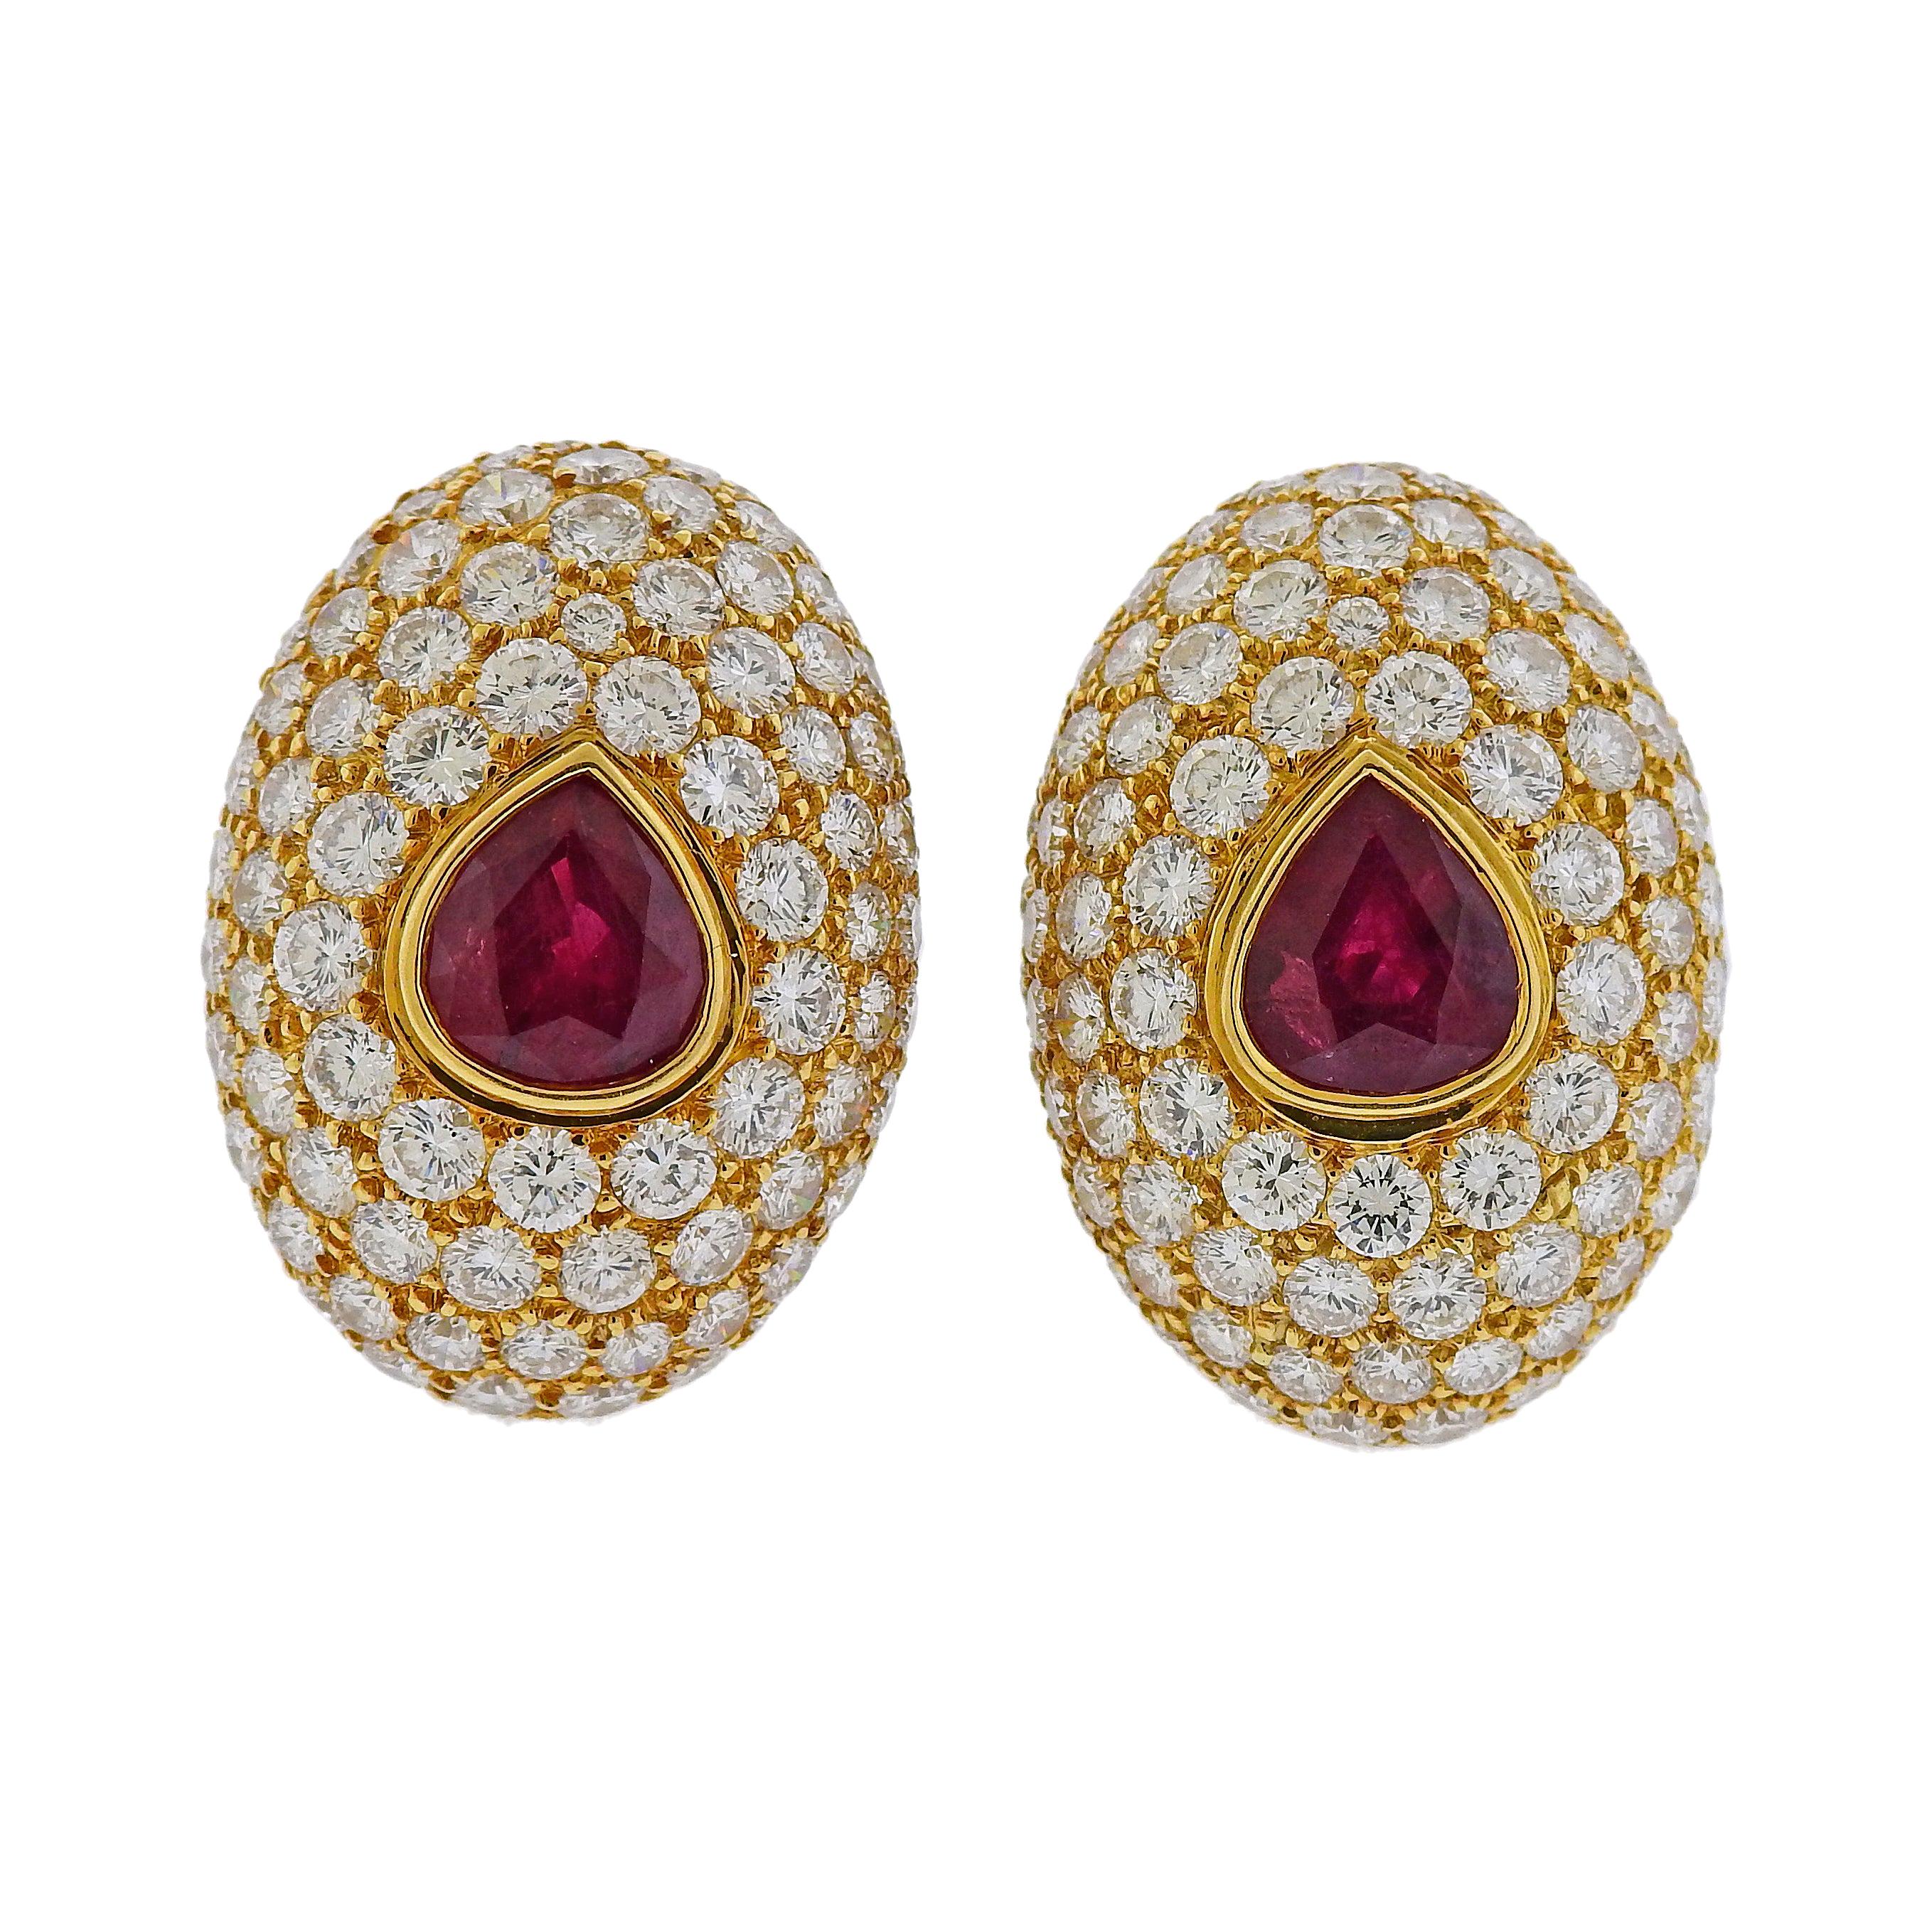 Hennell 15 Carat Diamond 6 Carat Ruby Gold Earrings For Sale